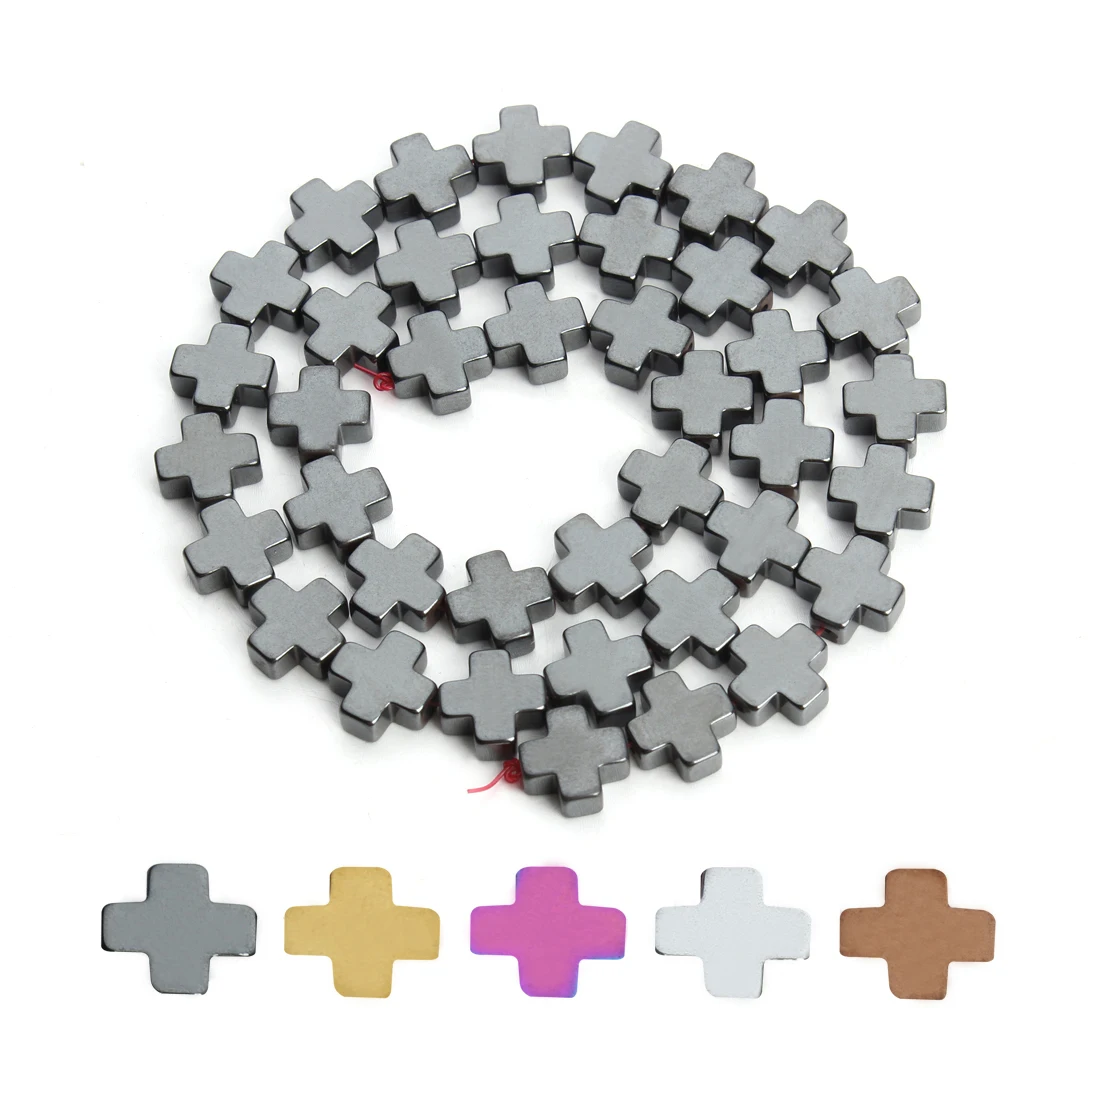 Natural Hematite Stone Beads Multicolor Cross Shape Loose Spacer Bead for Jewelry Making DIY Bracelet Necklace Charm Accessories